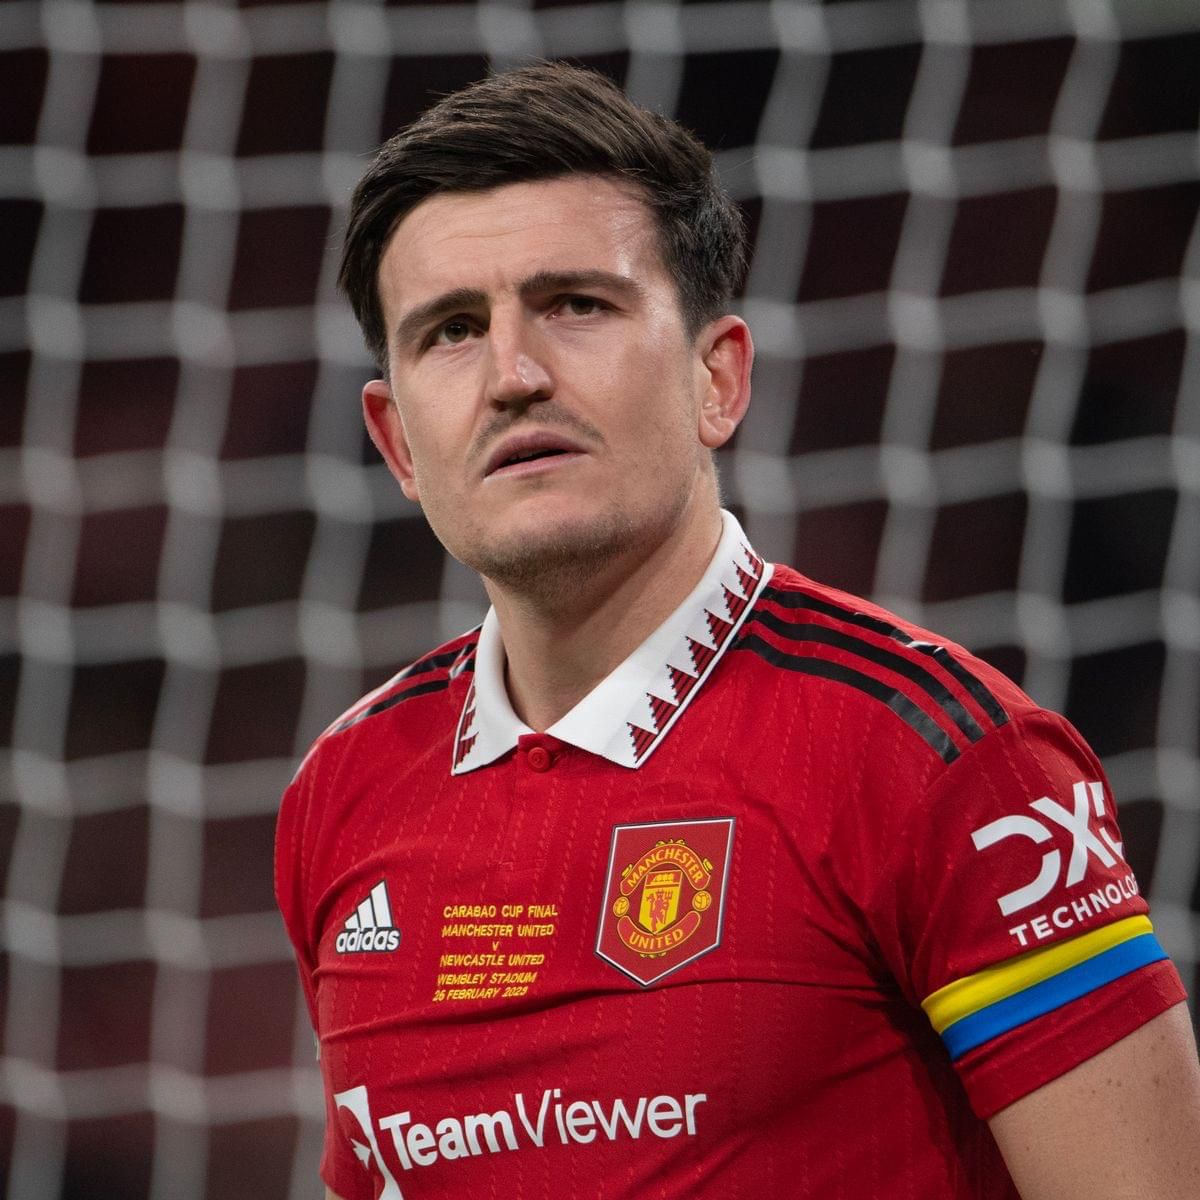 How can we explain to the future generation that one team scored 4 goals and the match ended 2-2? @HarryMaguire93 but Why? Brother Why? @ManUtd @UnitedStandMUFC @empire_mu @metsbarmby @UtdPlug @ojbsports @BBCSport @SABC_Sport @ESPNUK